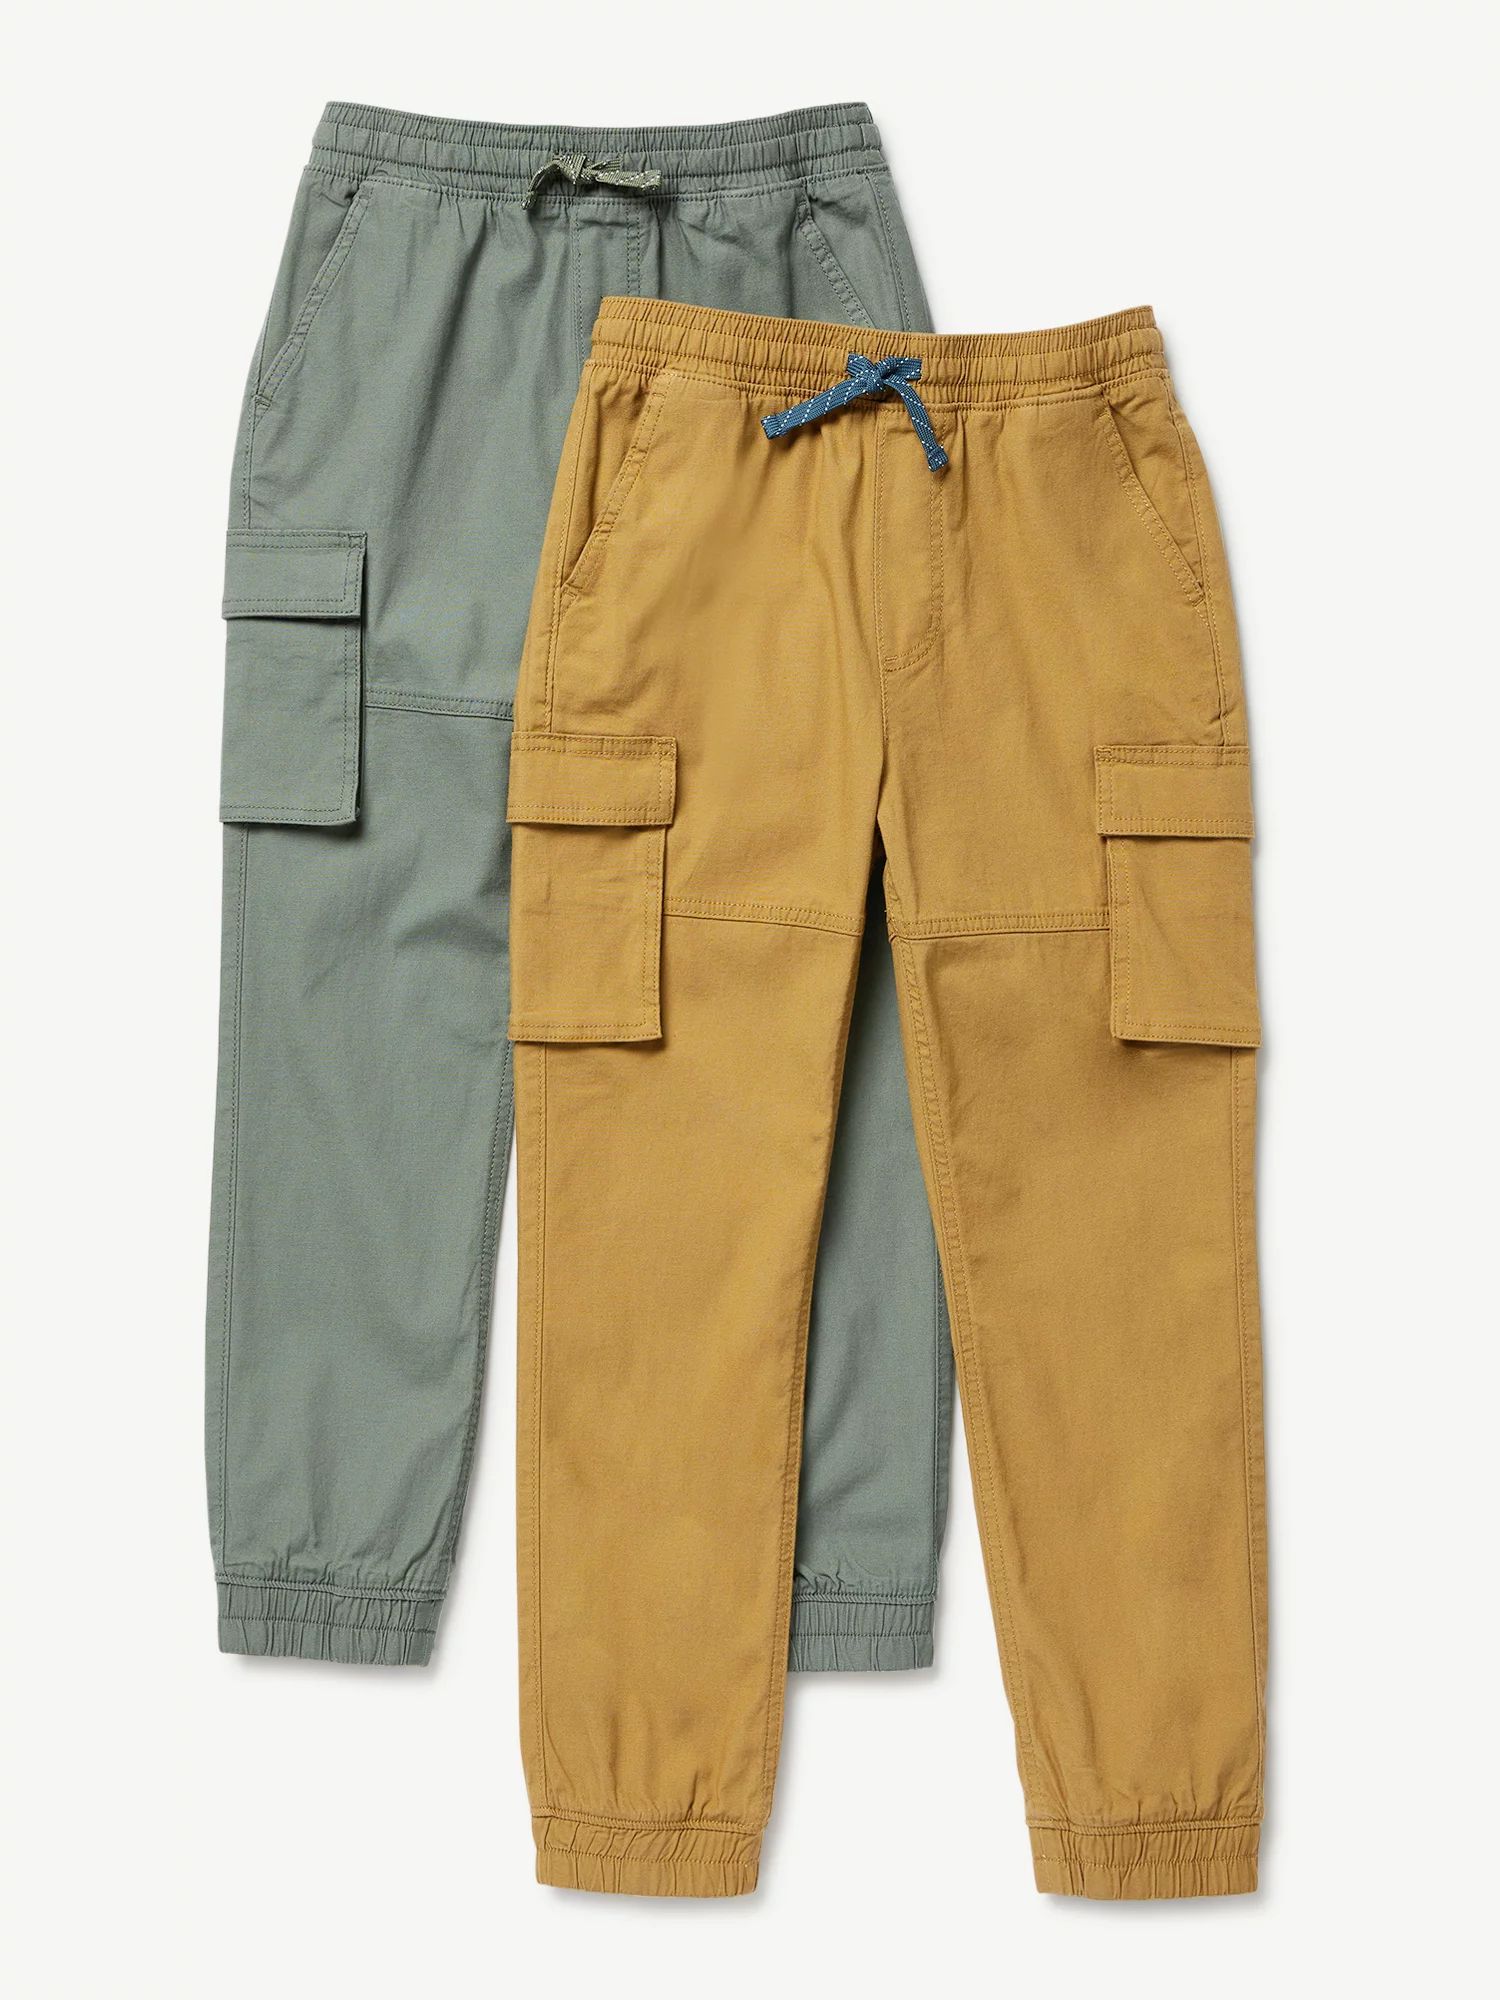 Free Assembly Boys Stretch Cargo 2-Pack Joggers, Sizes 4-18 | Walmart (US)